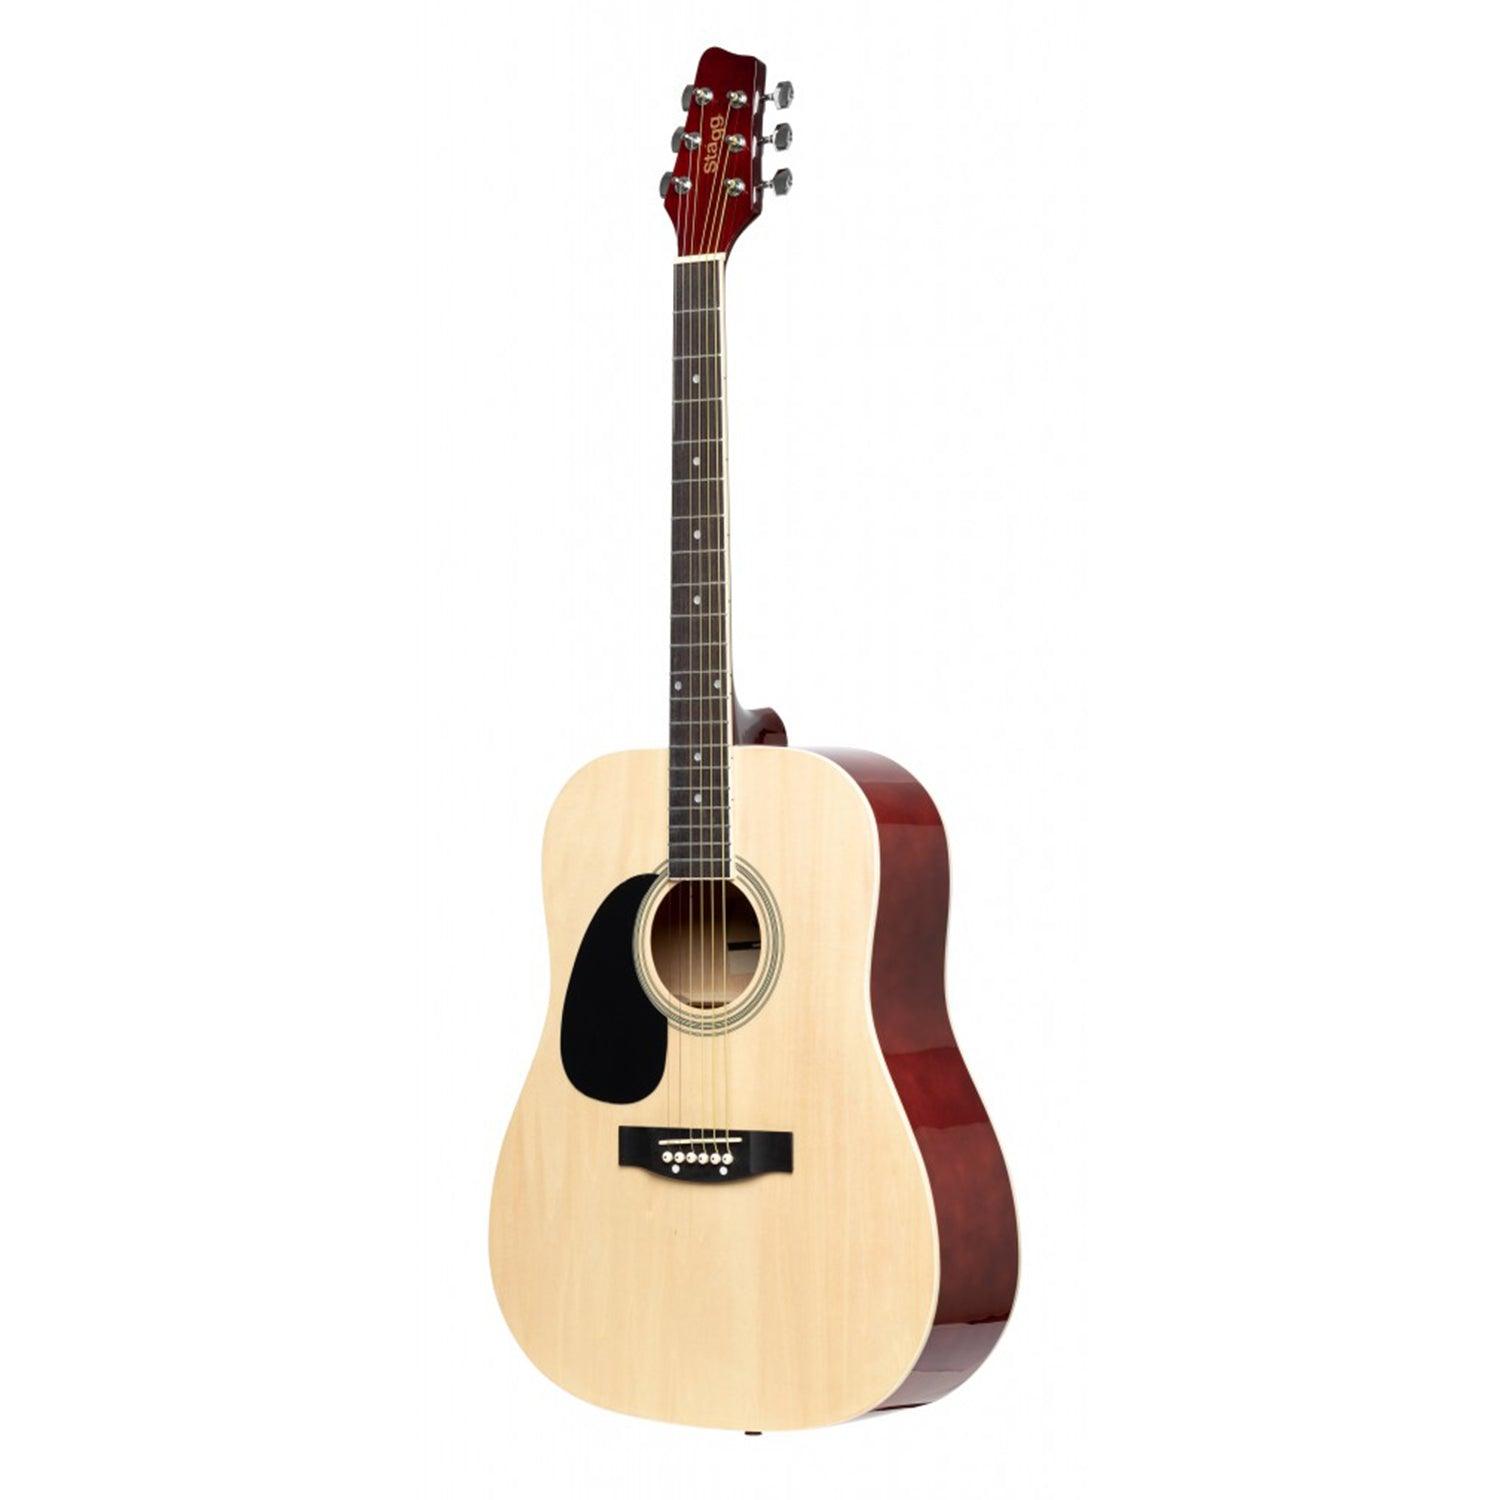 Stagg SA20D LH-N Natural Dreadnought Acoustic Guitar with Basswood Top Left Hand - DY Pro Audio